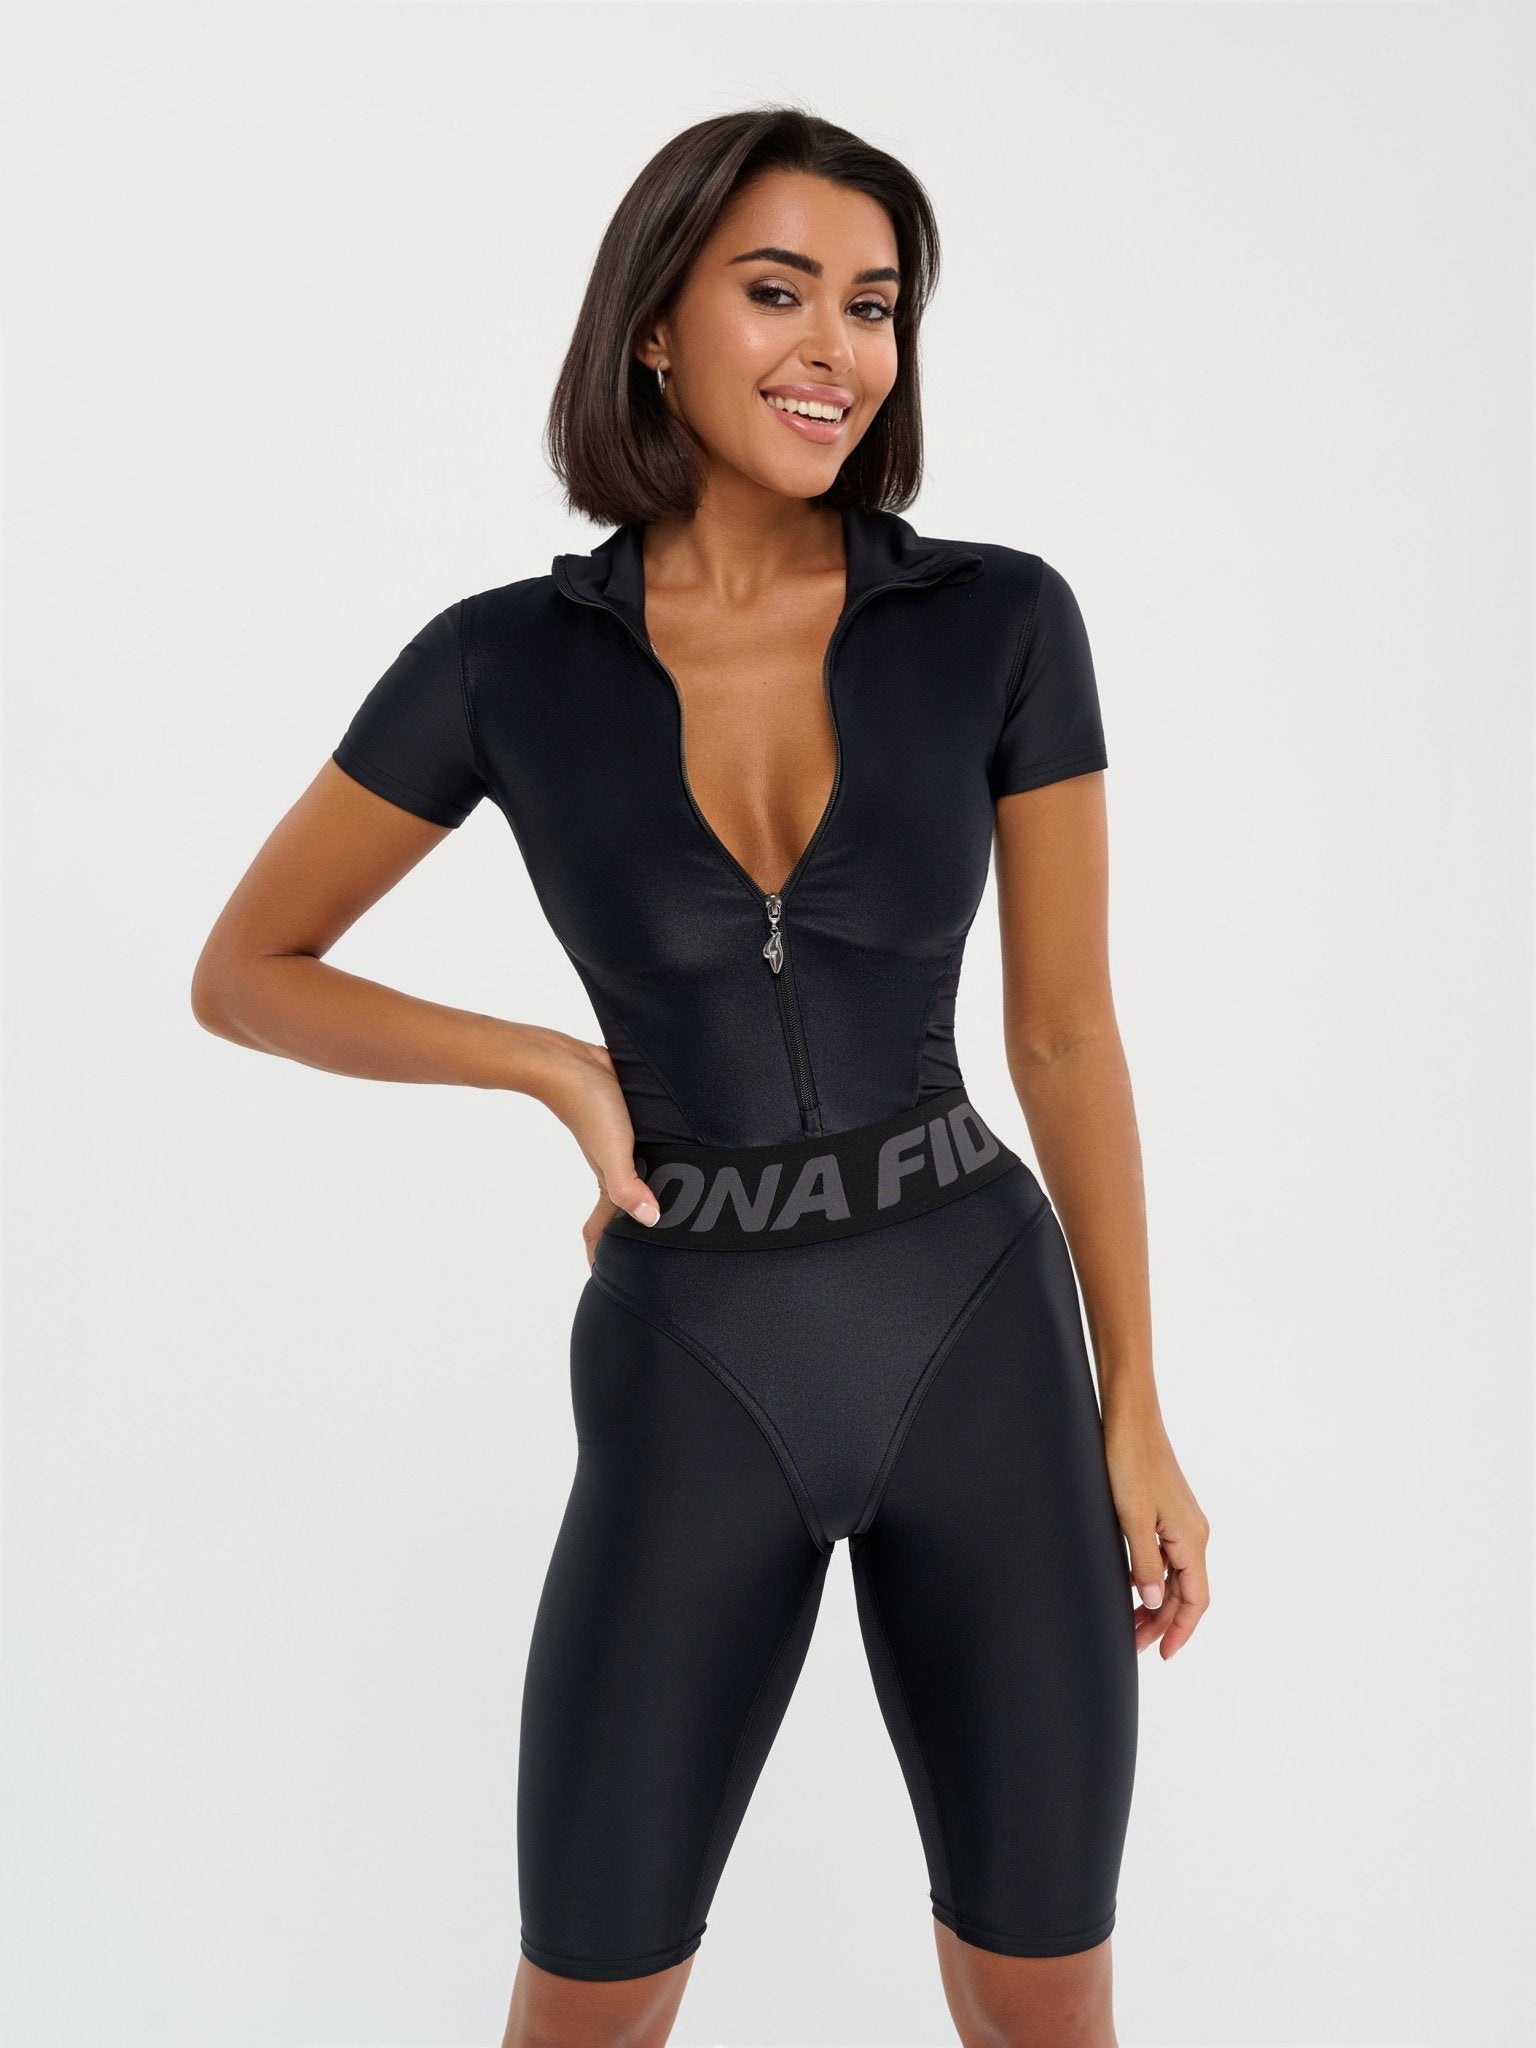 Bona Fide Premium Quality Workout Rompers and Jumpsuits for Women